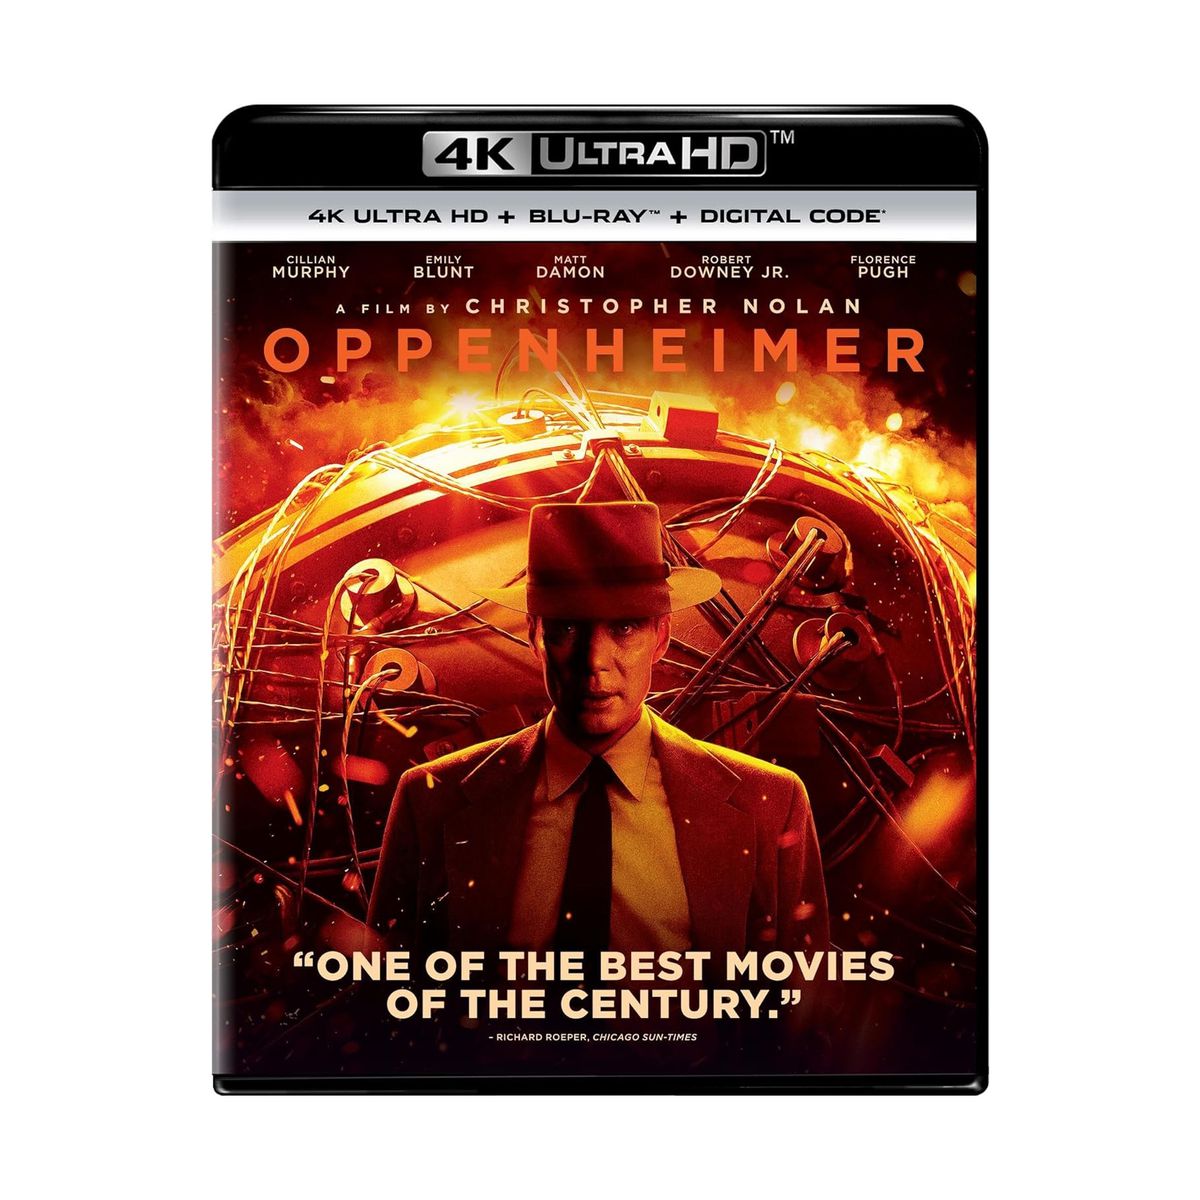 Celebrate Oppenheimer’s Best Picture award by picking up the 4K Blu-ray at its lowest price yet